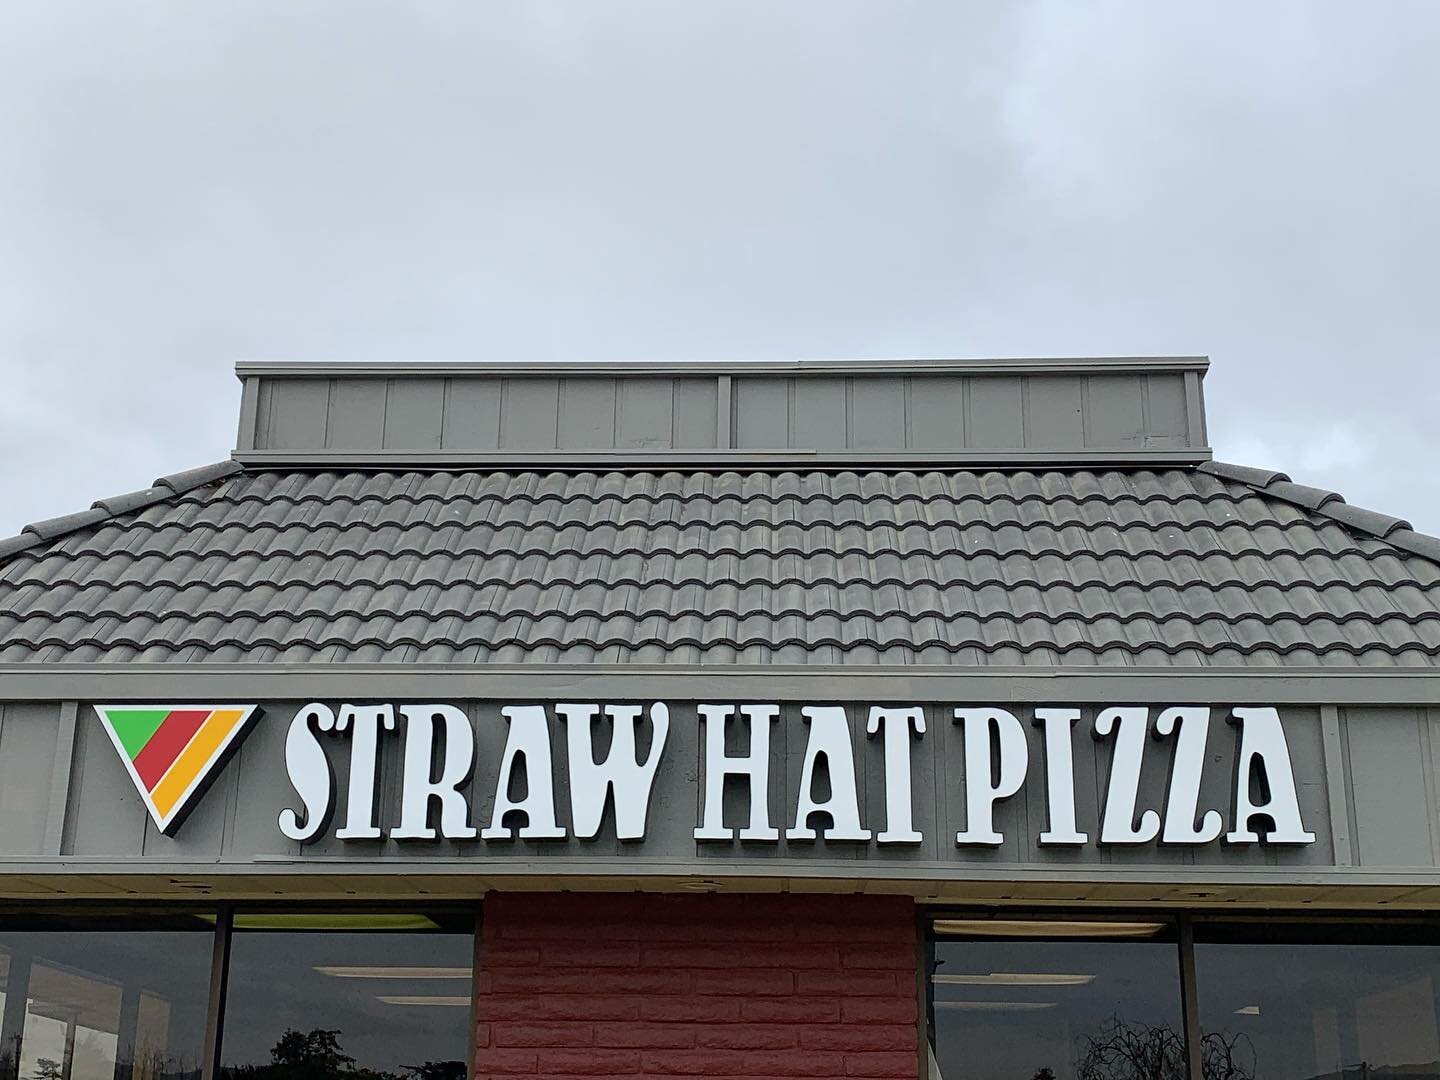 Straw Hat Pizza Salinas coming soon. Stay tuned. If you need  LED channel letter signage for your business facade, email me. Info@CreativeGDS.com #channelletters #signage #ledsigns